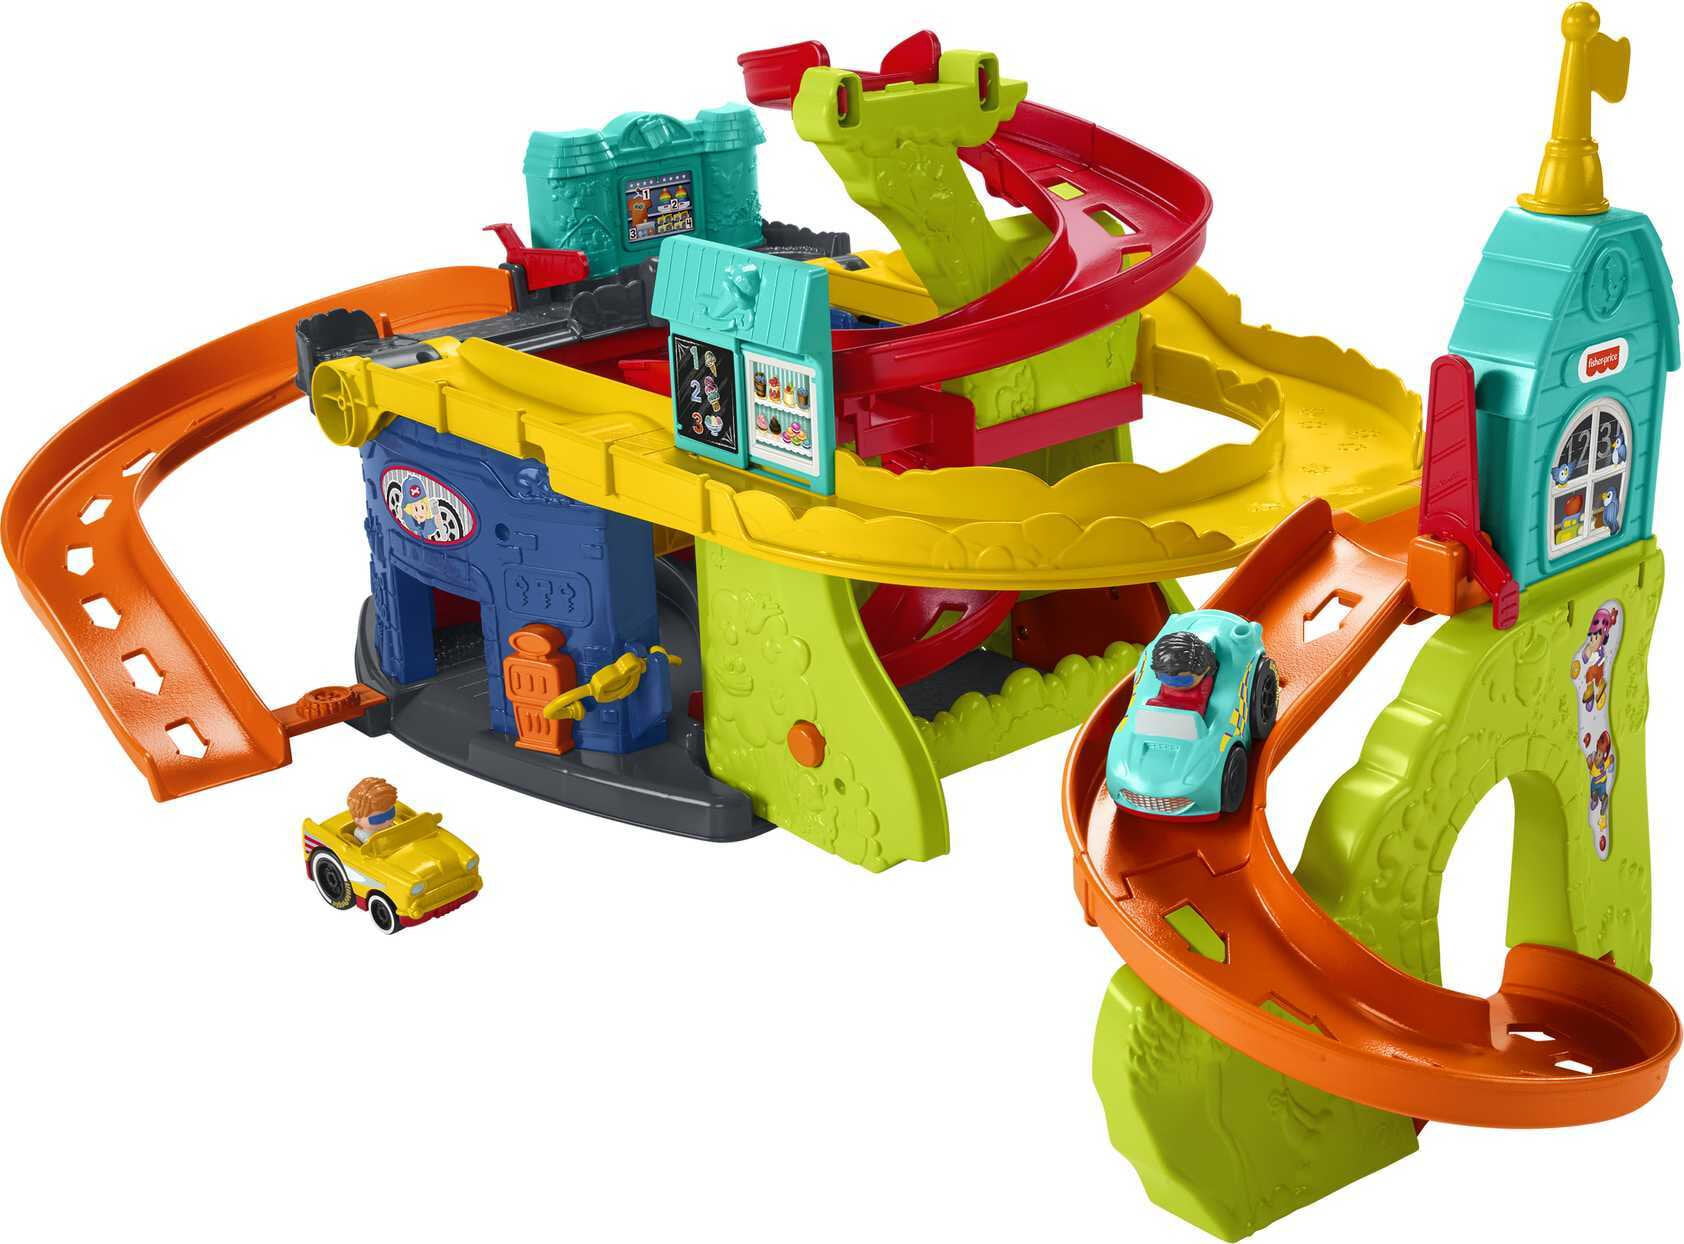 Fun country train set with lights and train sounds for Toddler Ages 2-5 years Early Learning Centre Happyland Magic Motion Train Set